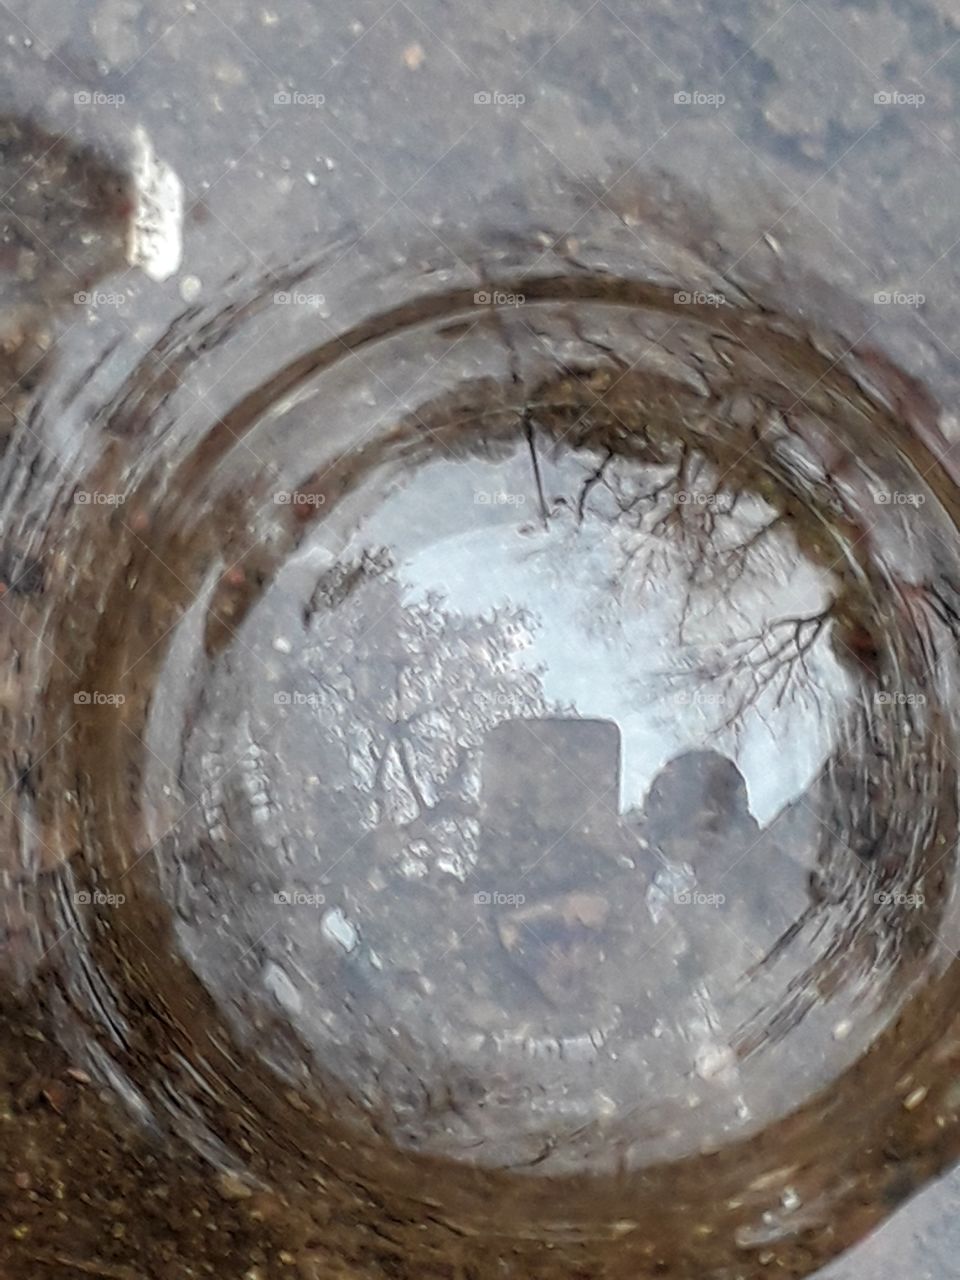 Rain water on the ground, reflection of rain water bubble